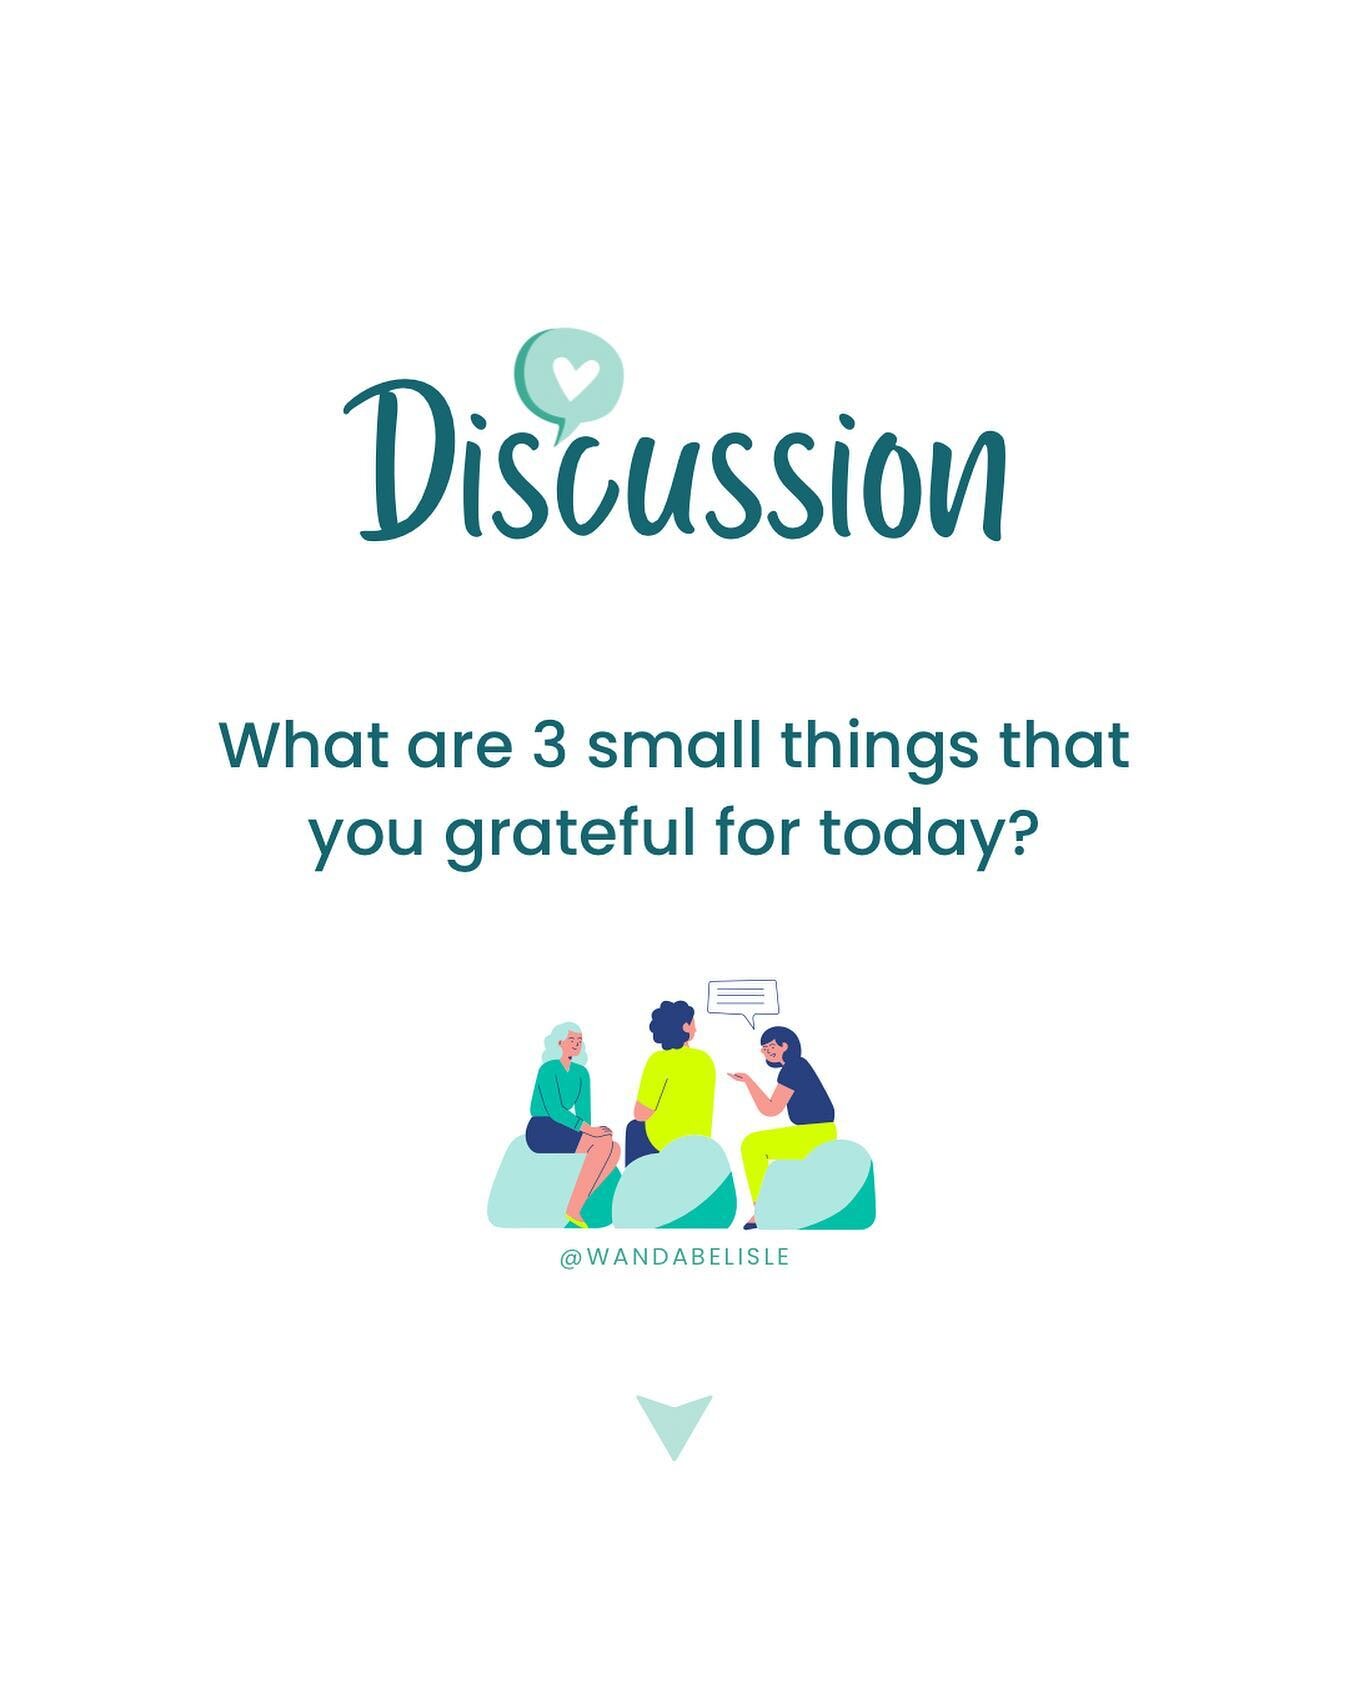 👇 post below what are 3 small things you&rsquo;re grateful for- me... Coffee, a comfy pair of cut offs, sunscreen 😎

😎 Gratitude is something I practice every day. By training yourself to look for the small things that bring you joy and make your 